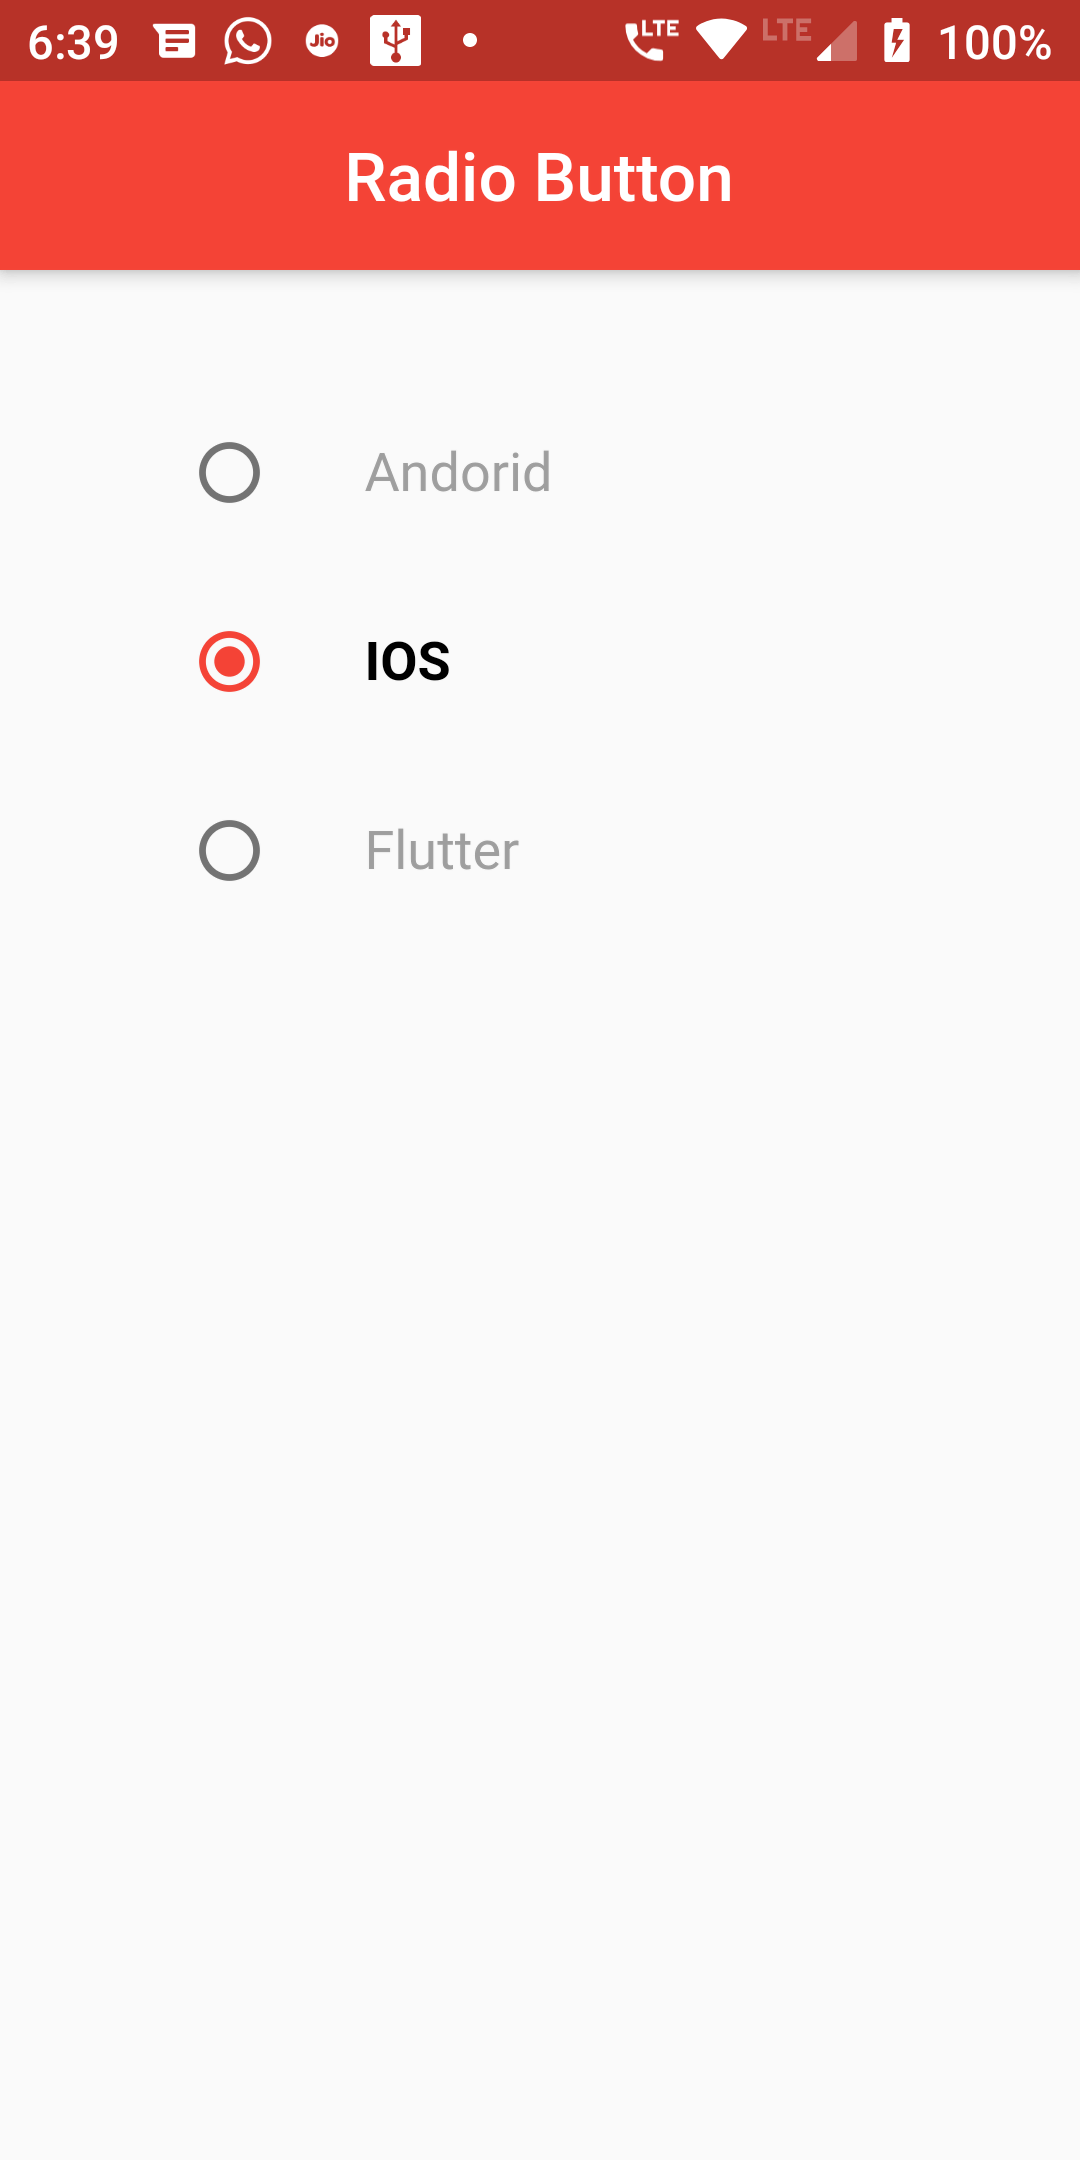 How To Change The Radio Button Color In Flutter App